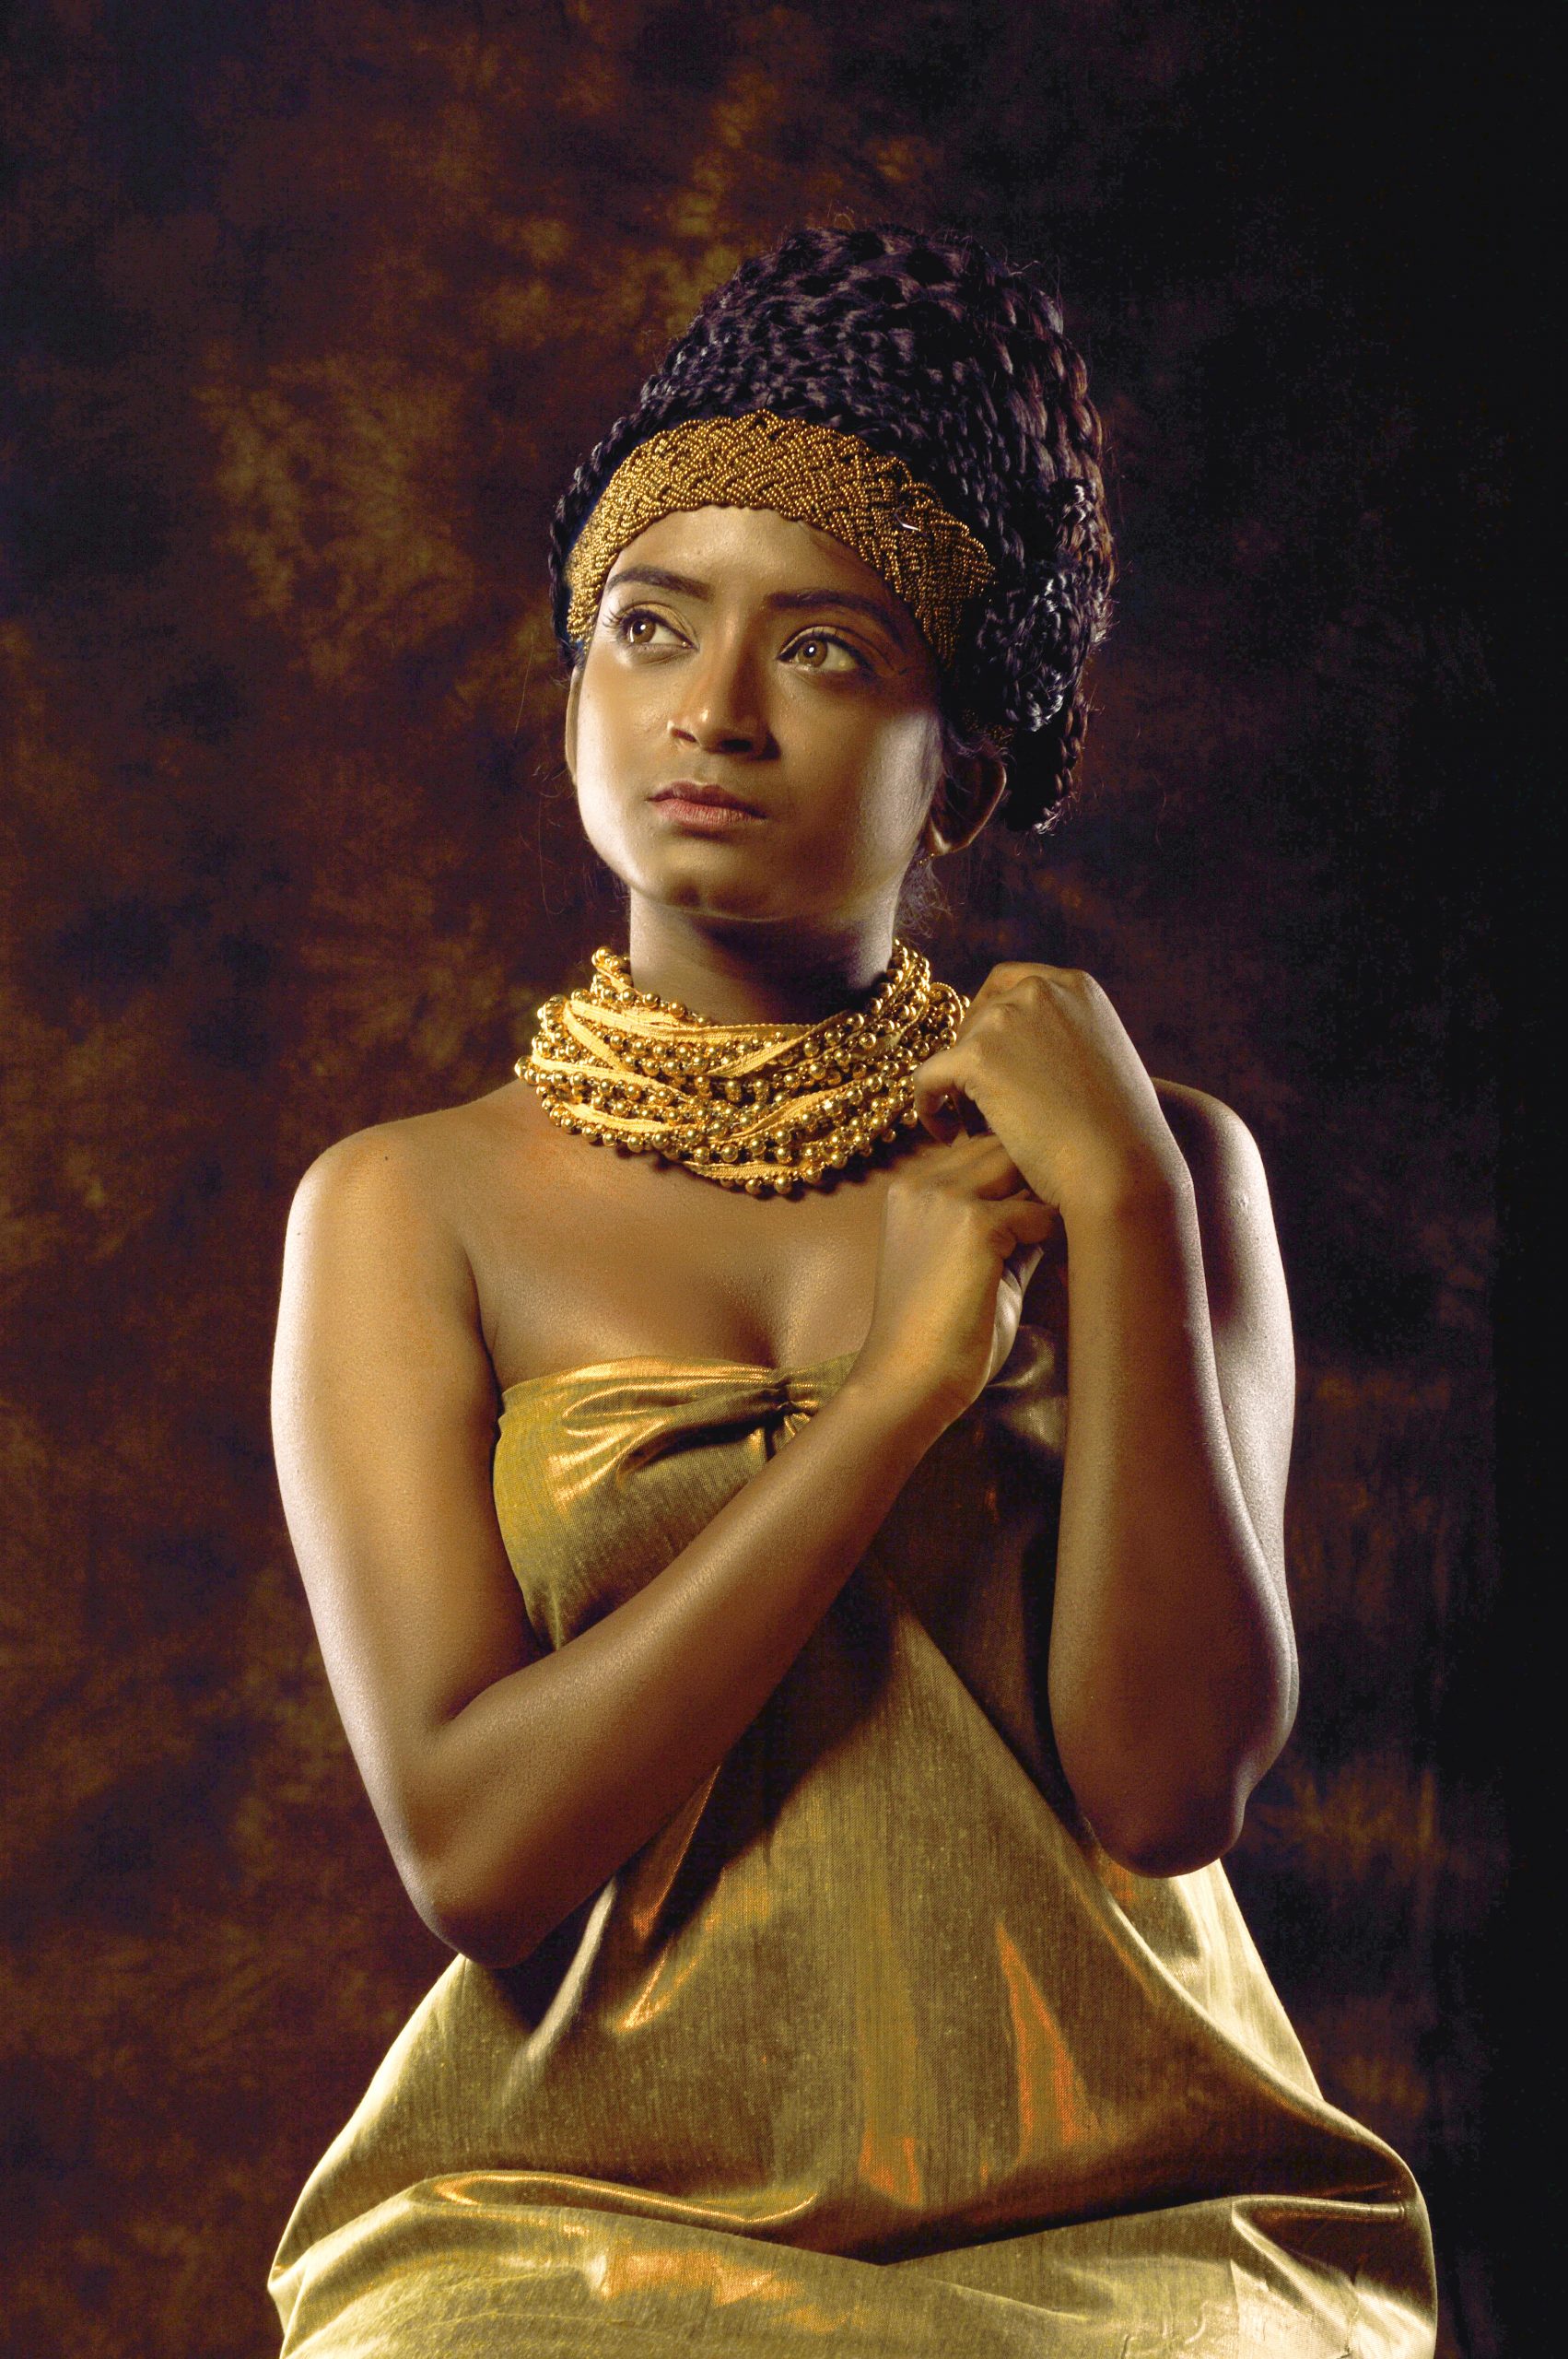 A pretty model dressed as an ancient queen.